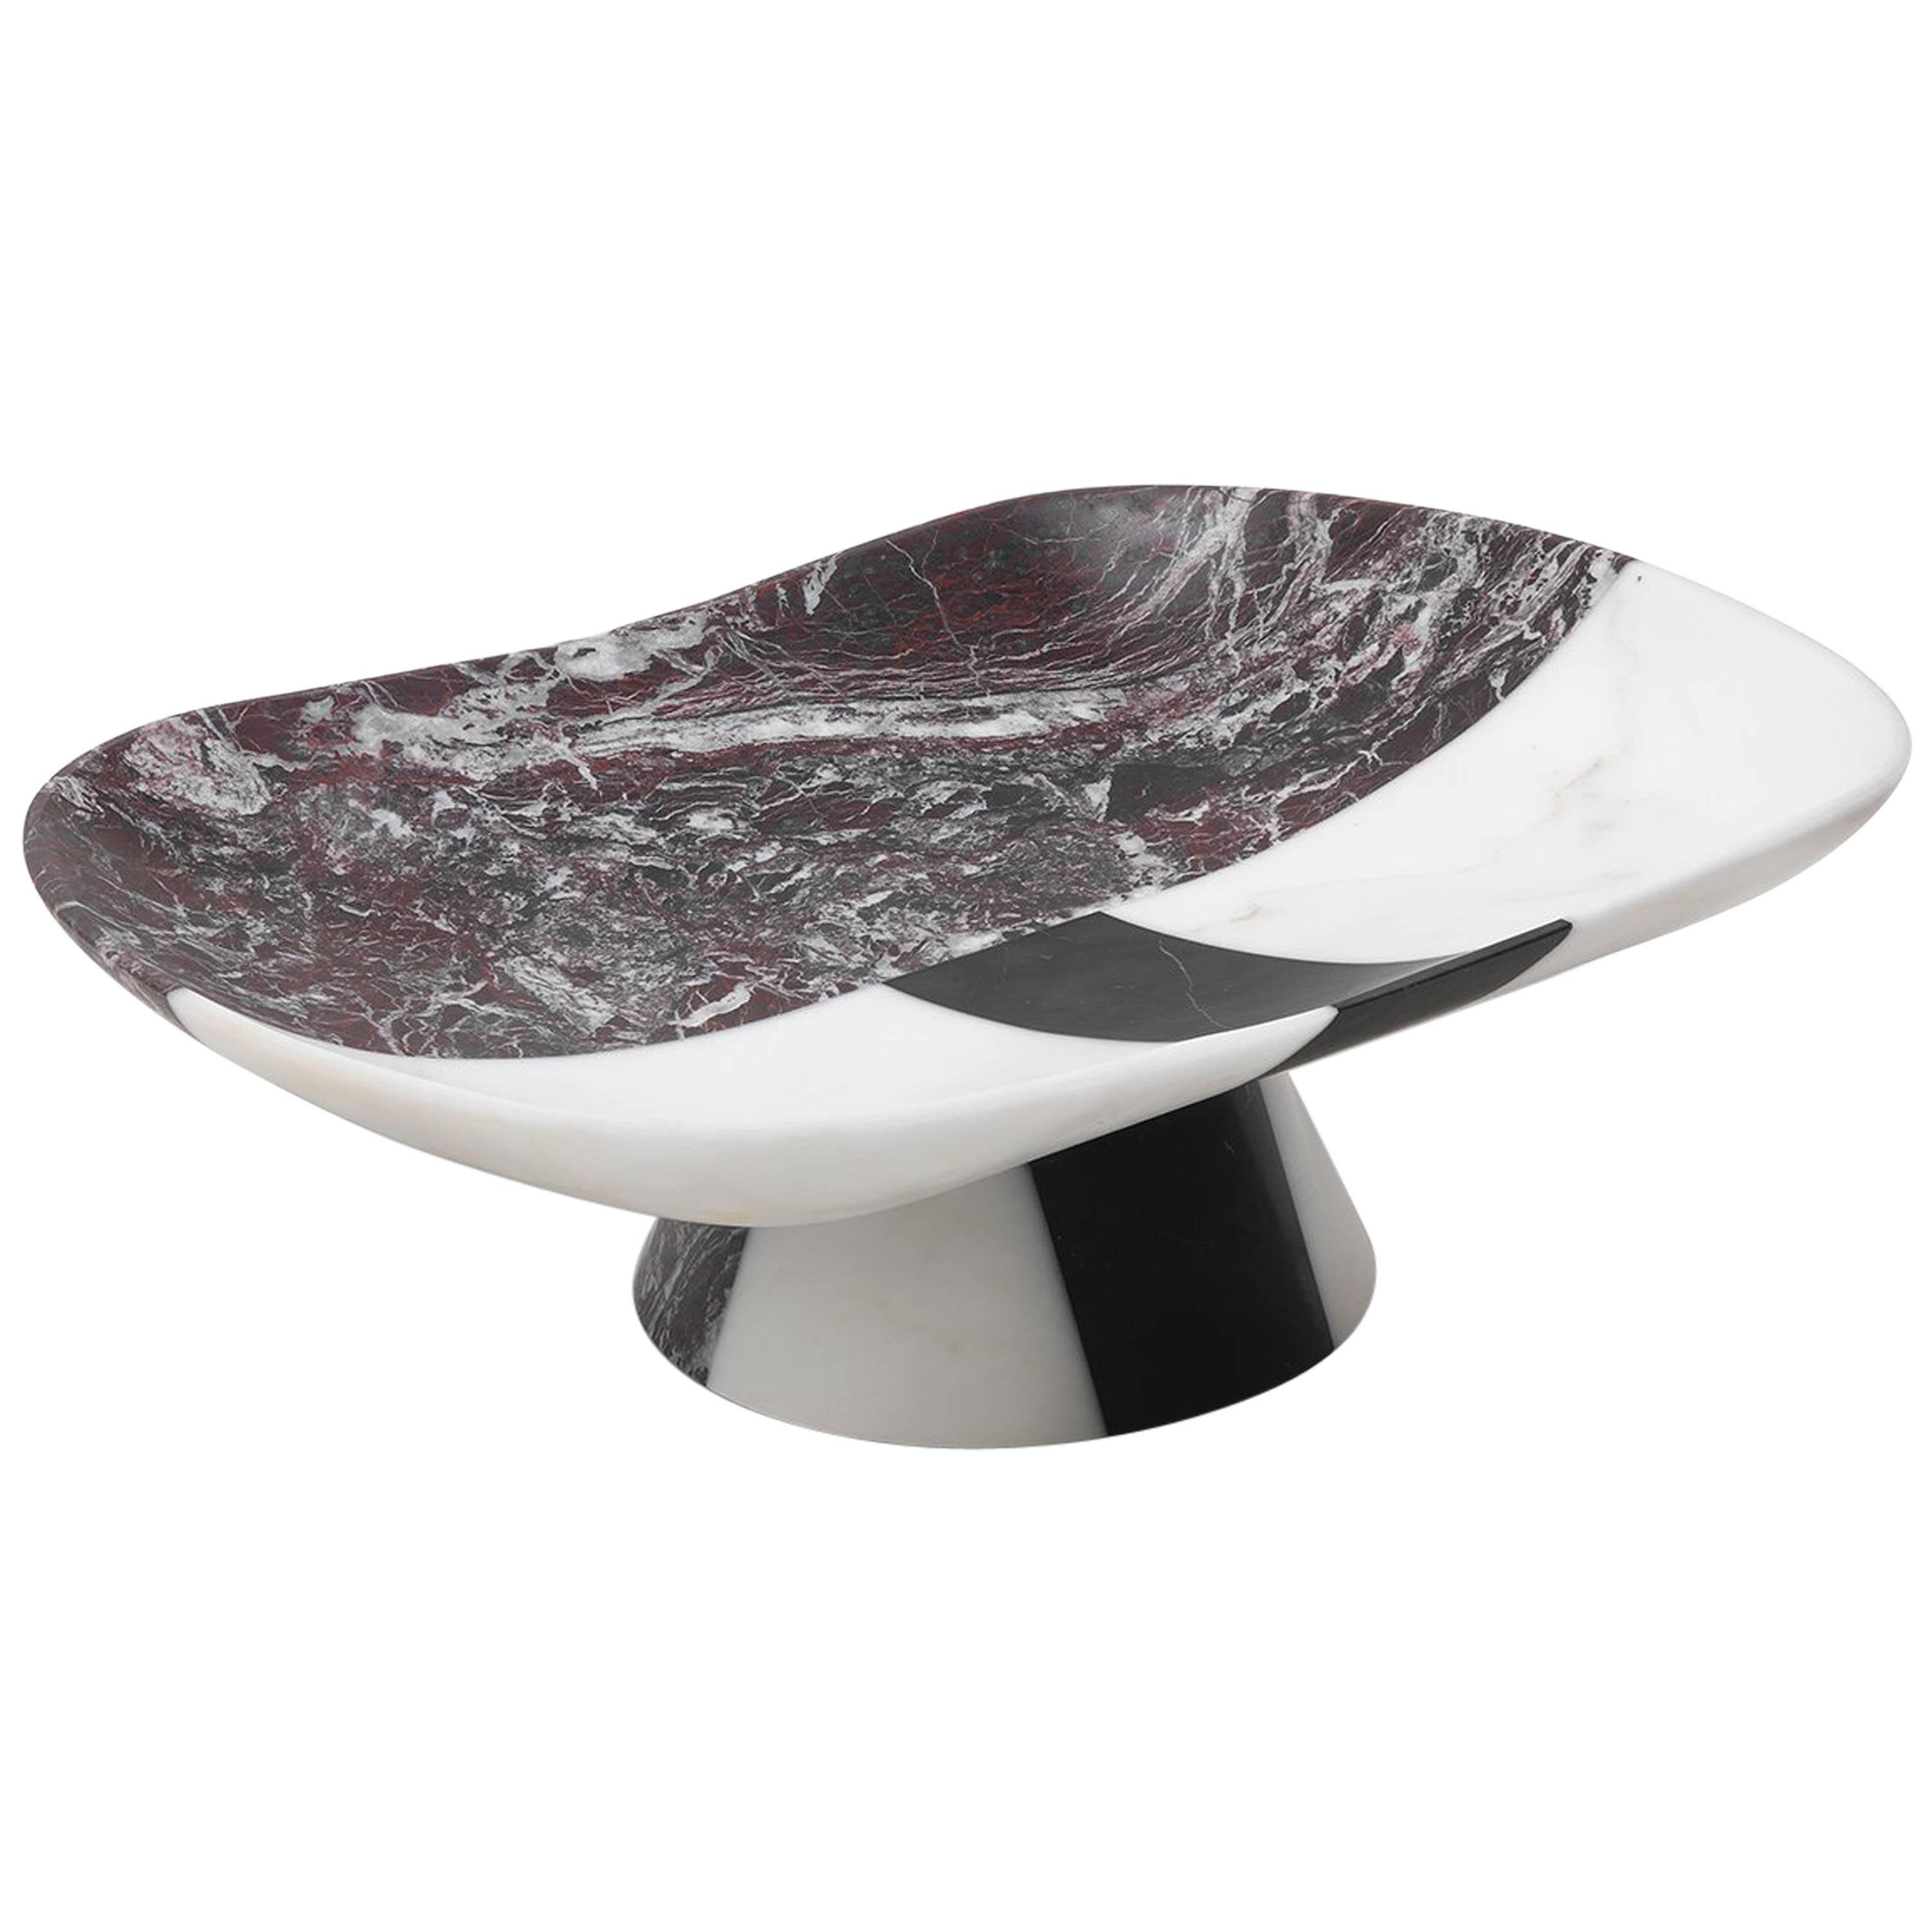 New Modern Centrepiece in White, Black and Red Marble, creator Matteo Cibic